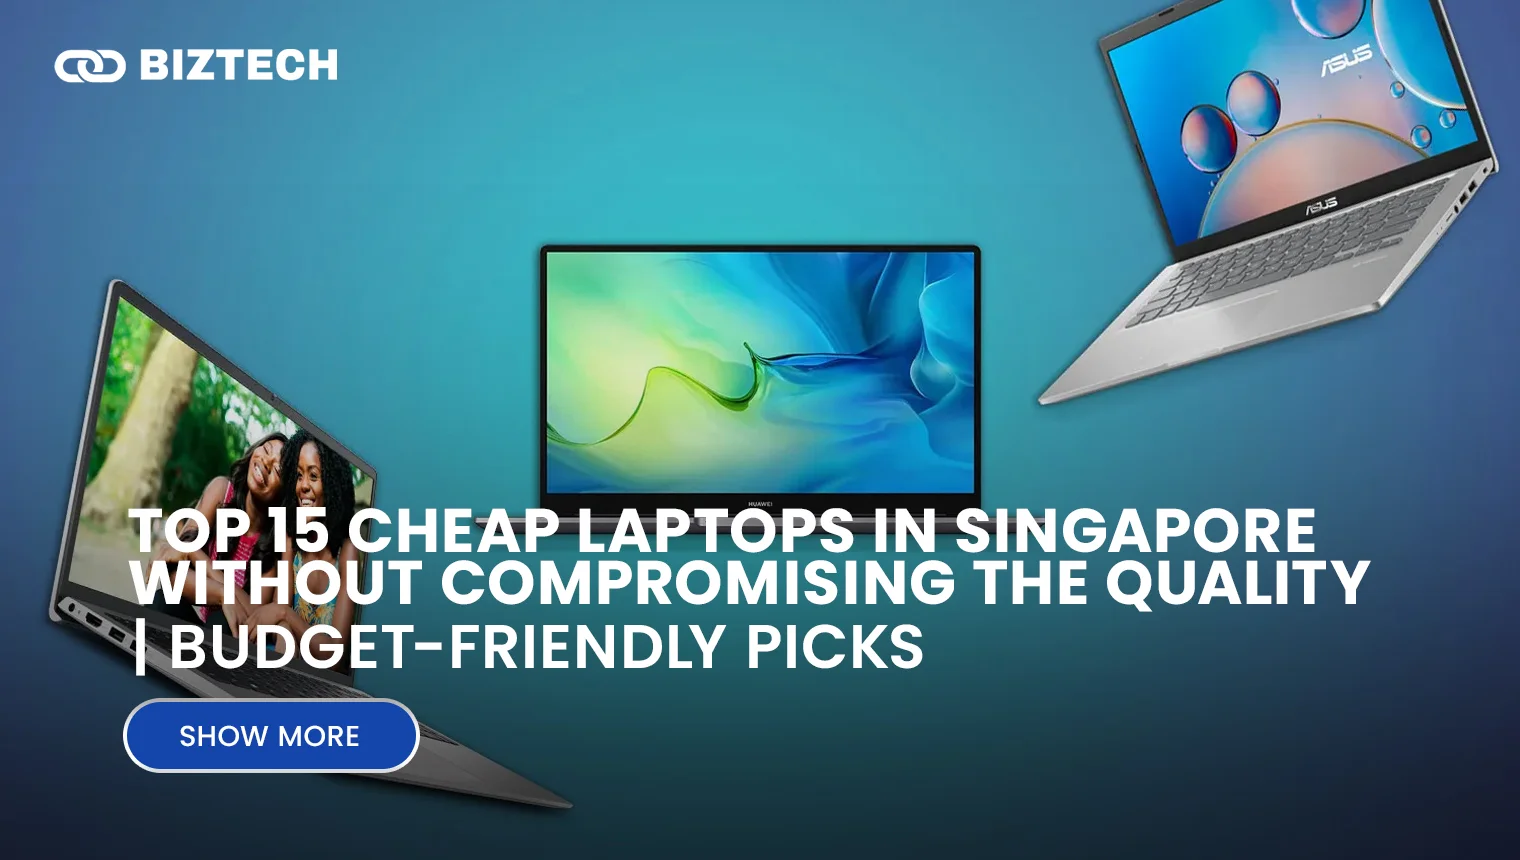 Top 15 Cheap Laptops in Singapore Without Compromising the Quality | Budget-Friendly Picks